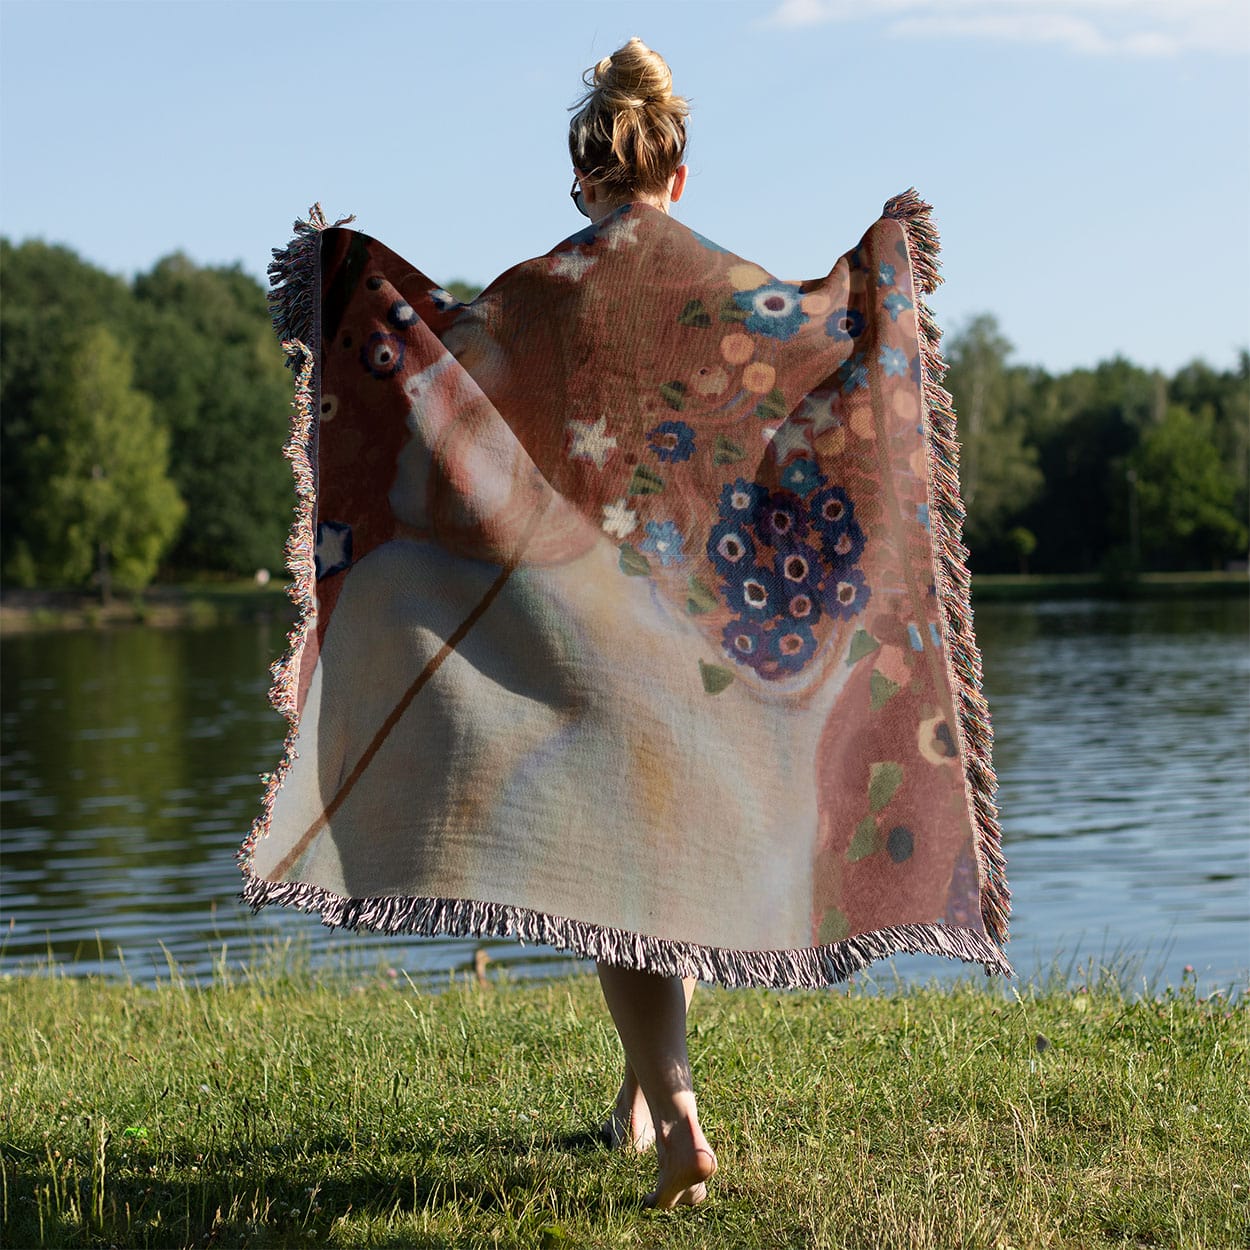 Woman with Flower Hair Woven Throw Blanket Held on a Woman's Back Outside